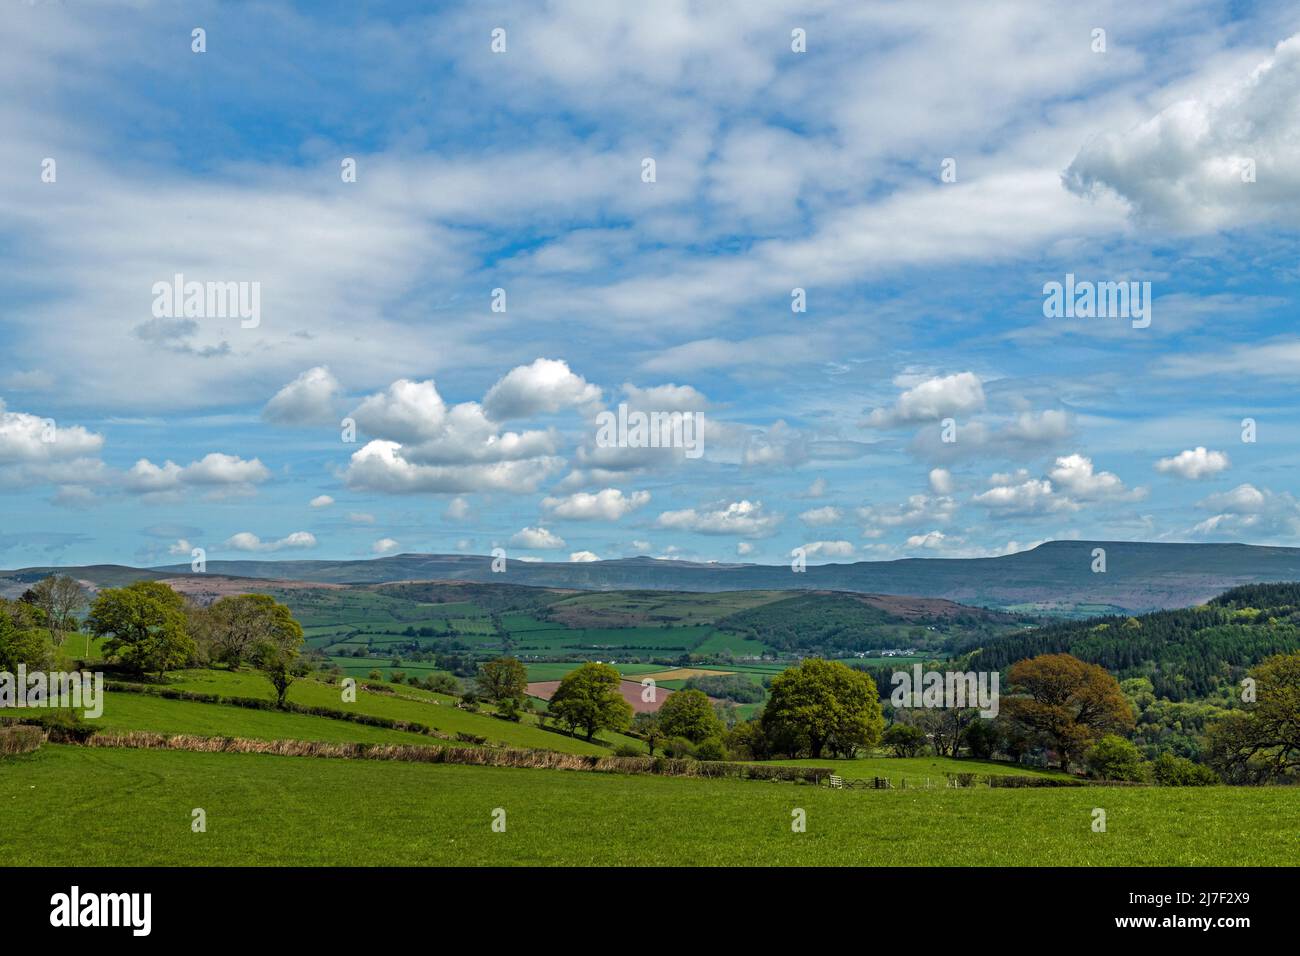 A view across the Usk Valley towards the Black Mountains, part og the Brecon Beacons National Park, on a sunny May day Stock Photo